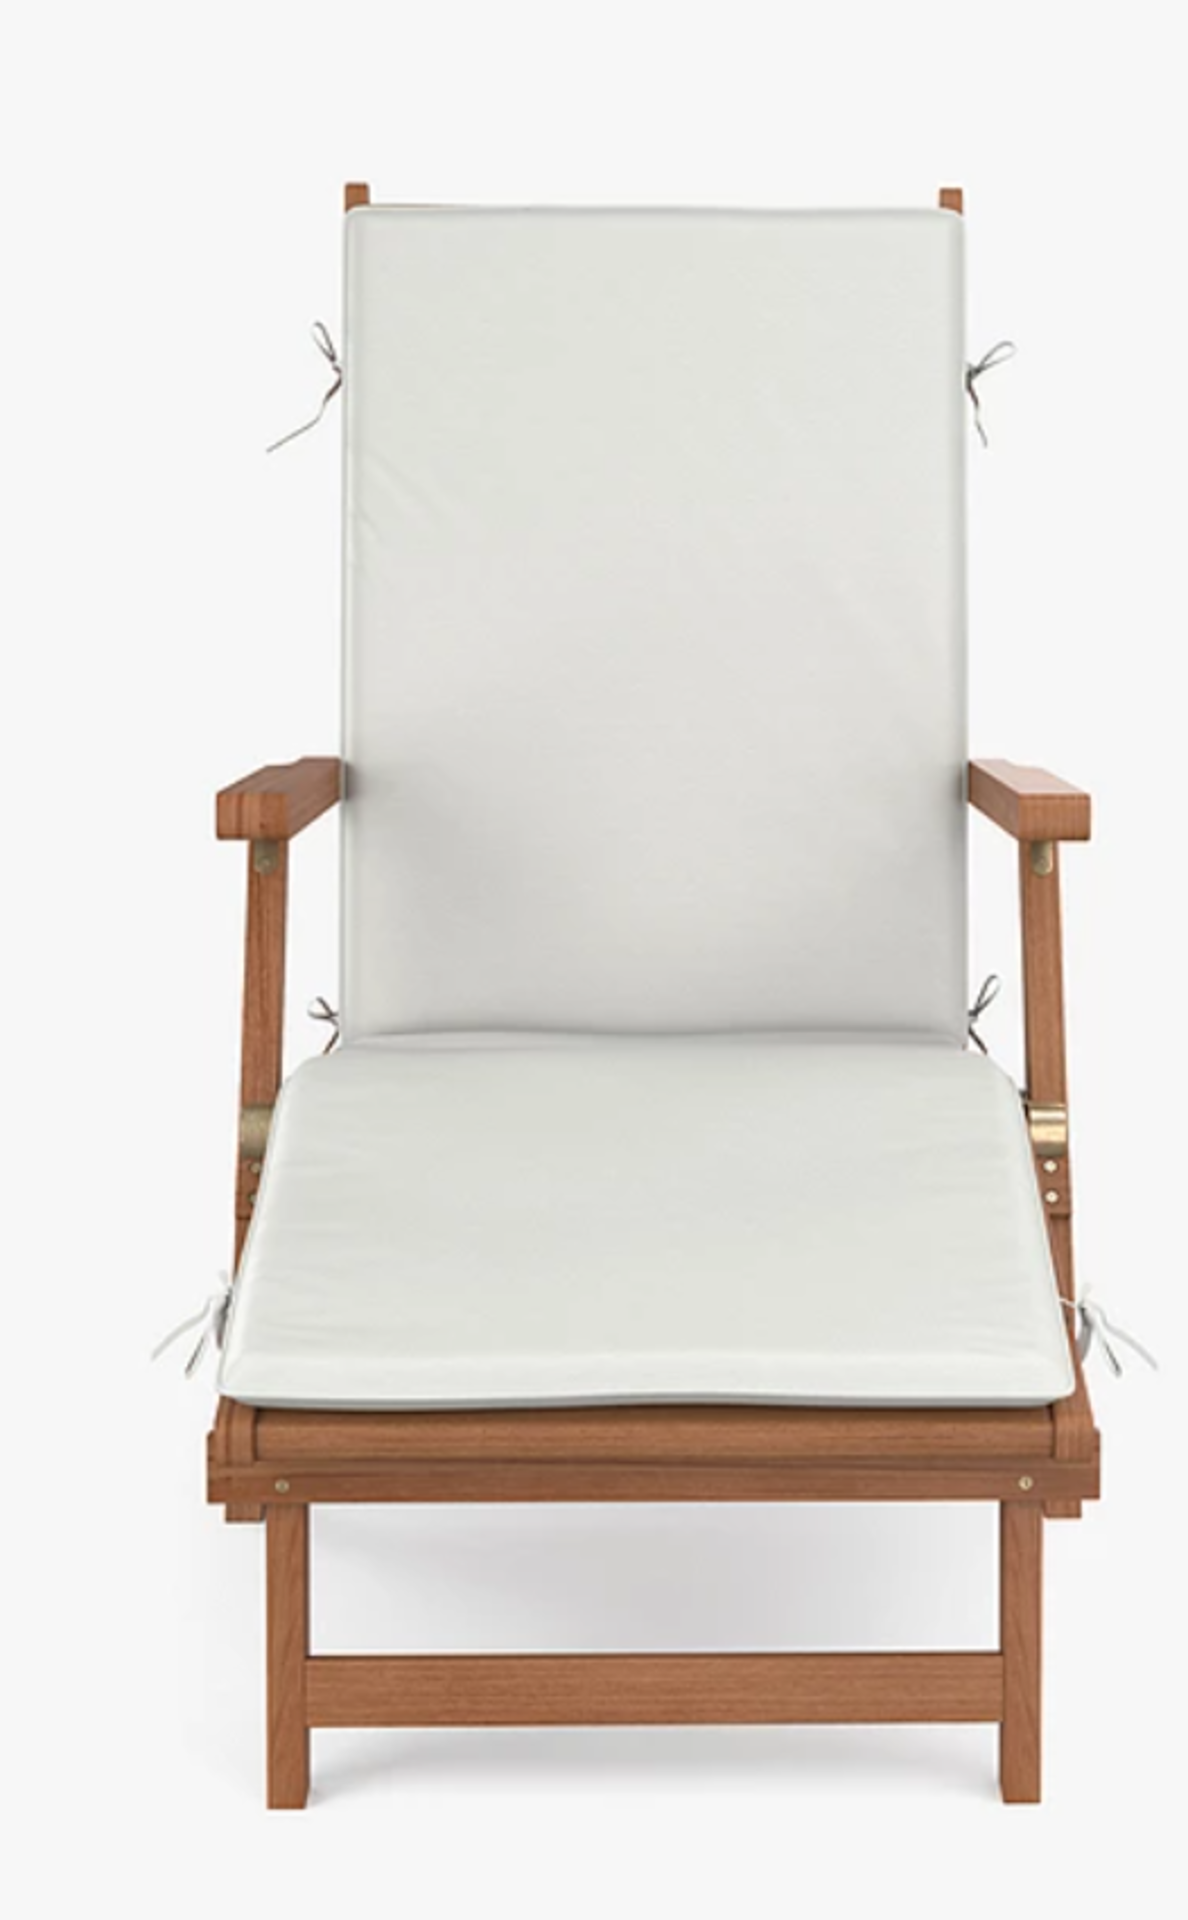 2 x New & Boxed John Lewis Cove Garden Steamer Chair, FSC-Certified (Eucalyptus Wood), Natural. - Image 3 of 5